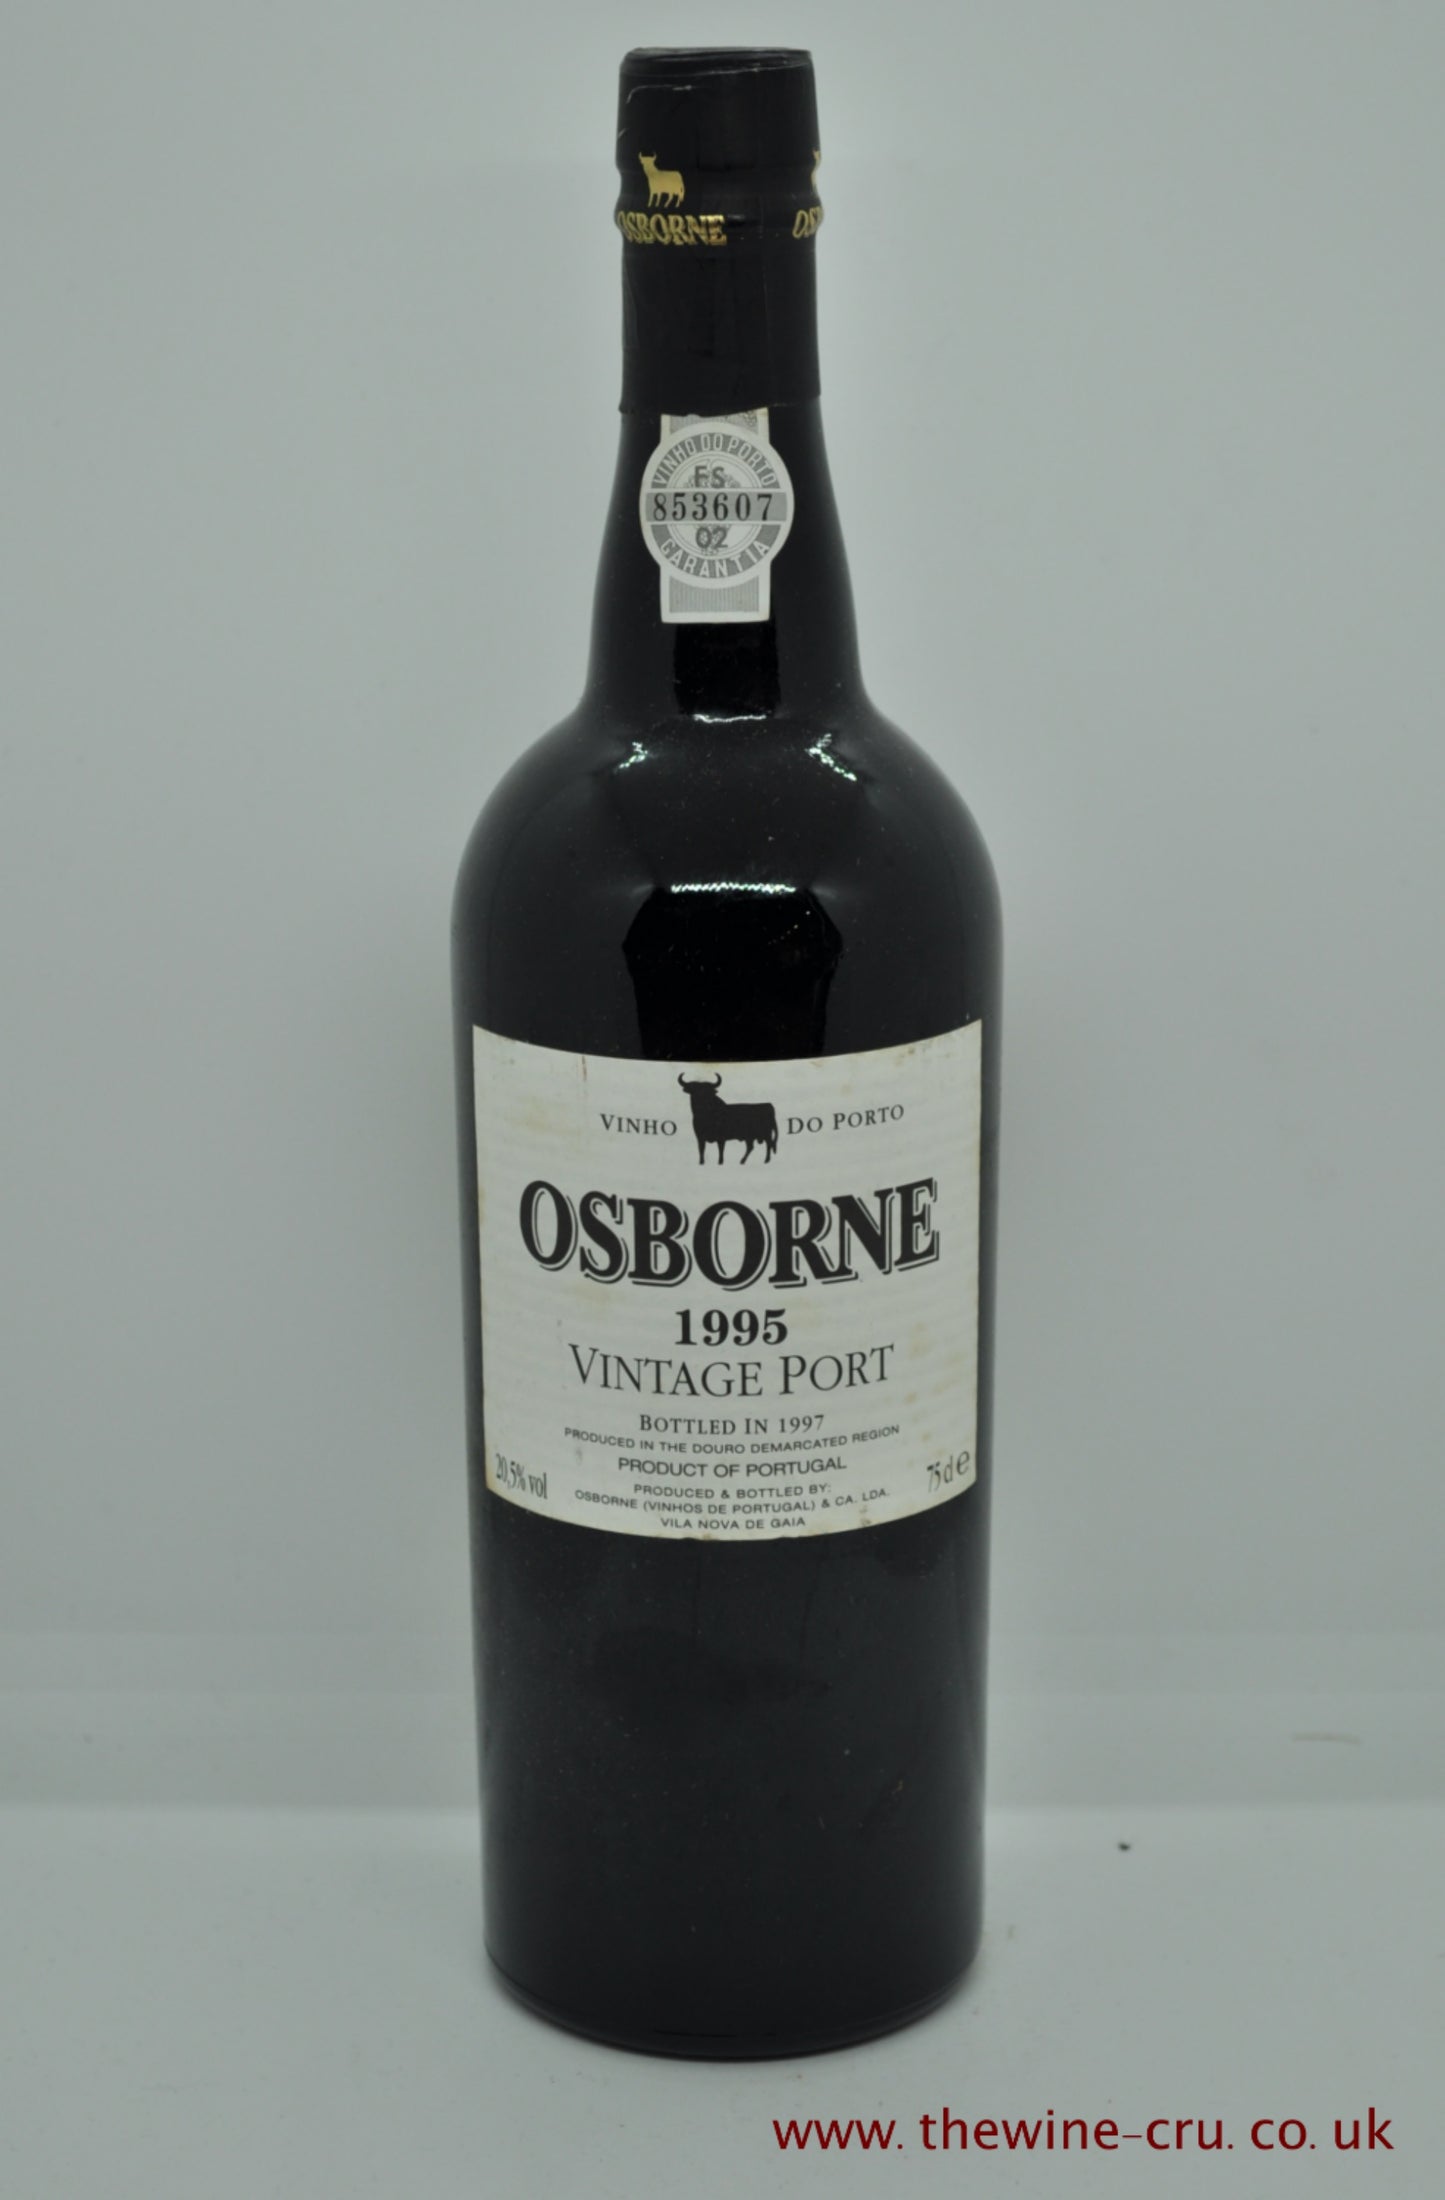 A bottle of 1995 vintage port wine. Osborne Vintage Port 1995. Portugal. Capsule, label and level all good. Immediate delivery. Free local delivery. Gift wrapping available.